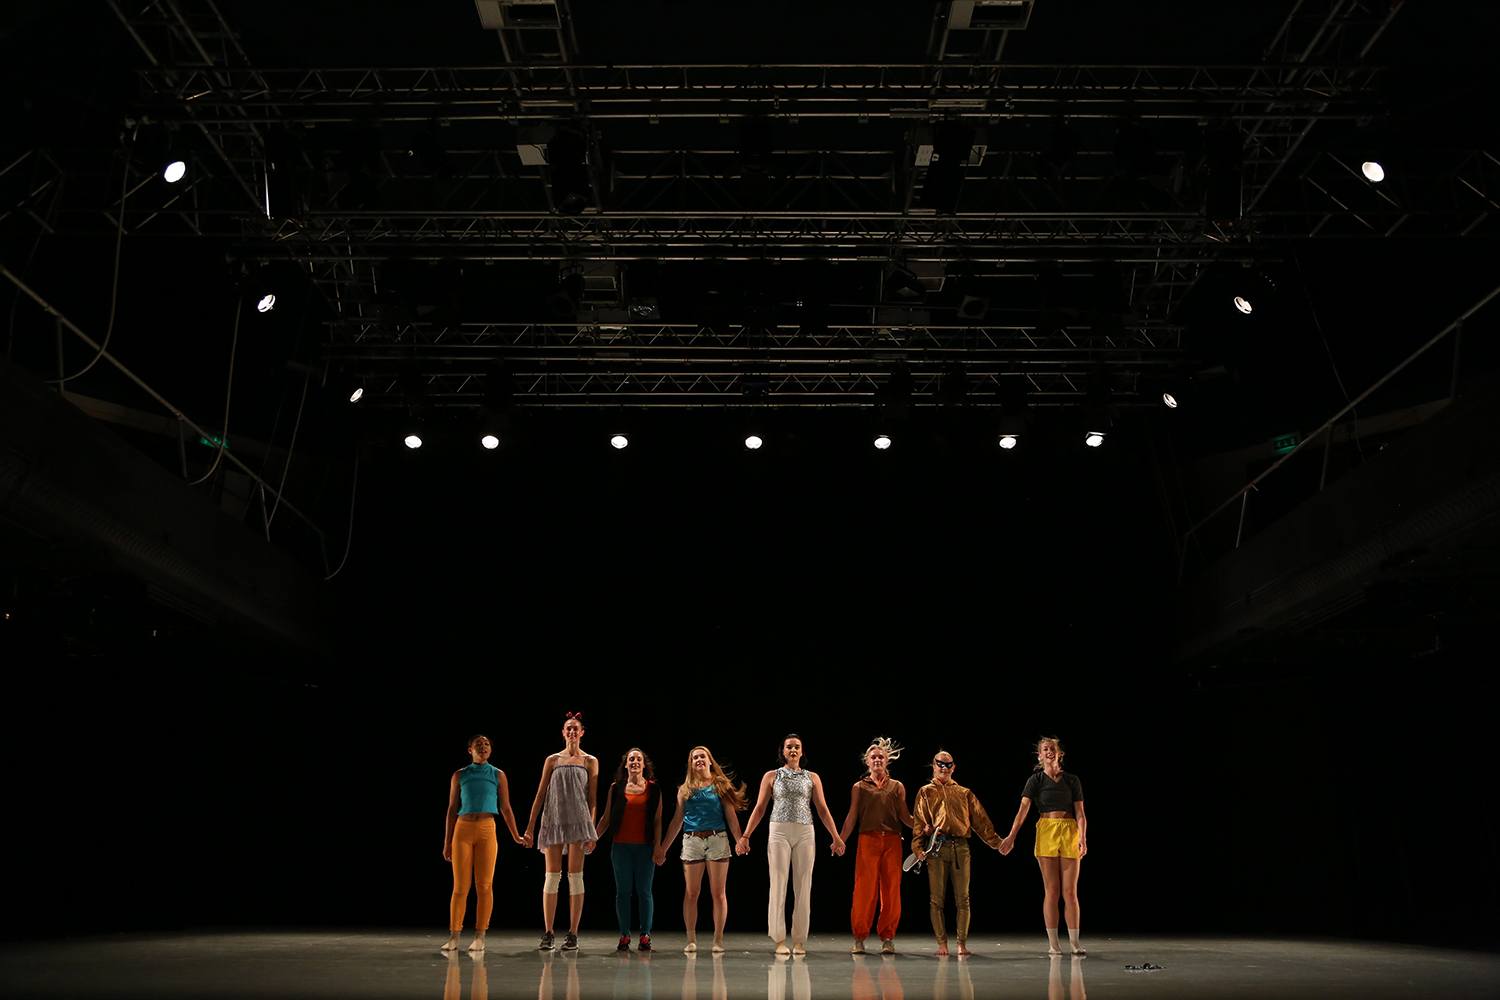 Dancers stand on stage holding hands ready to take a bow